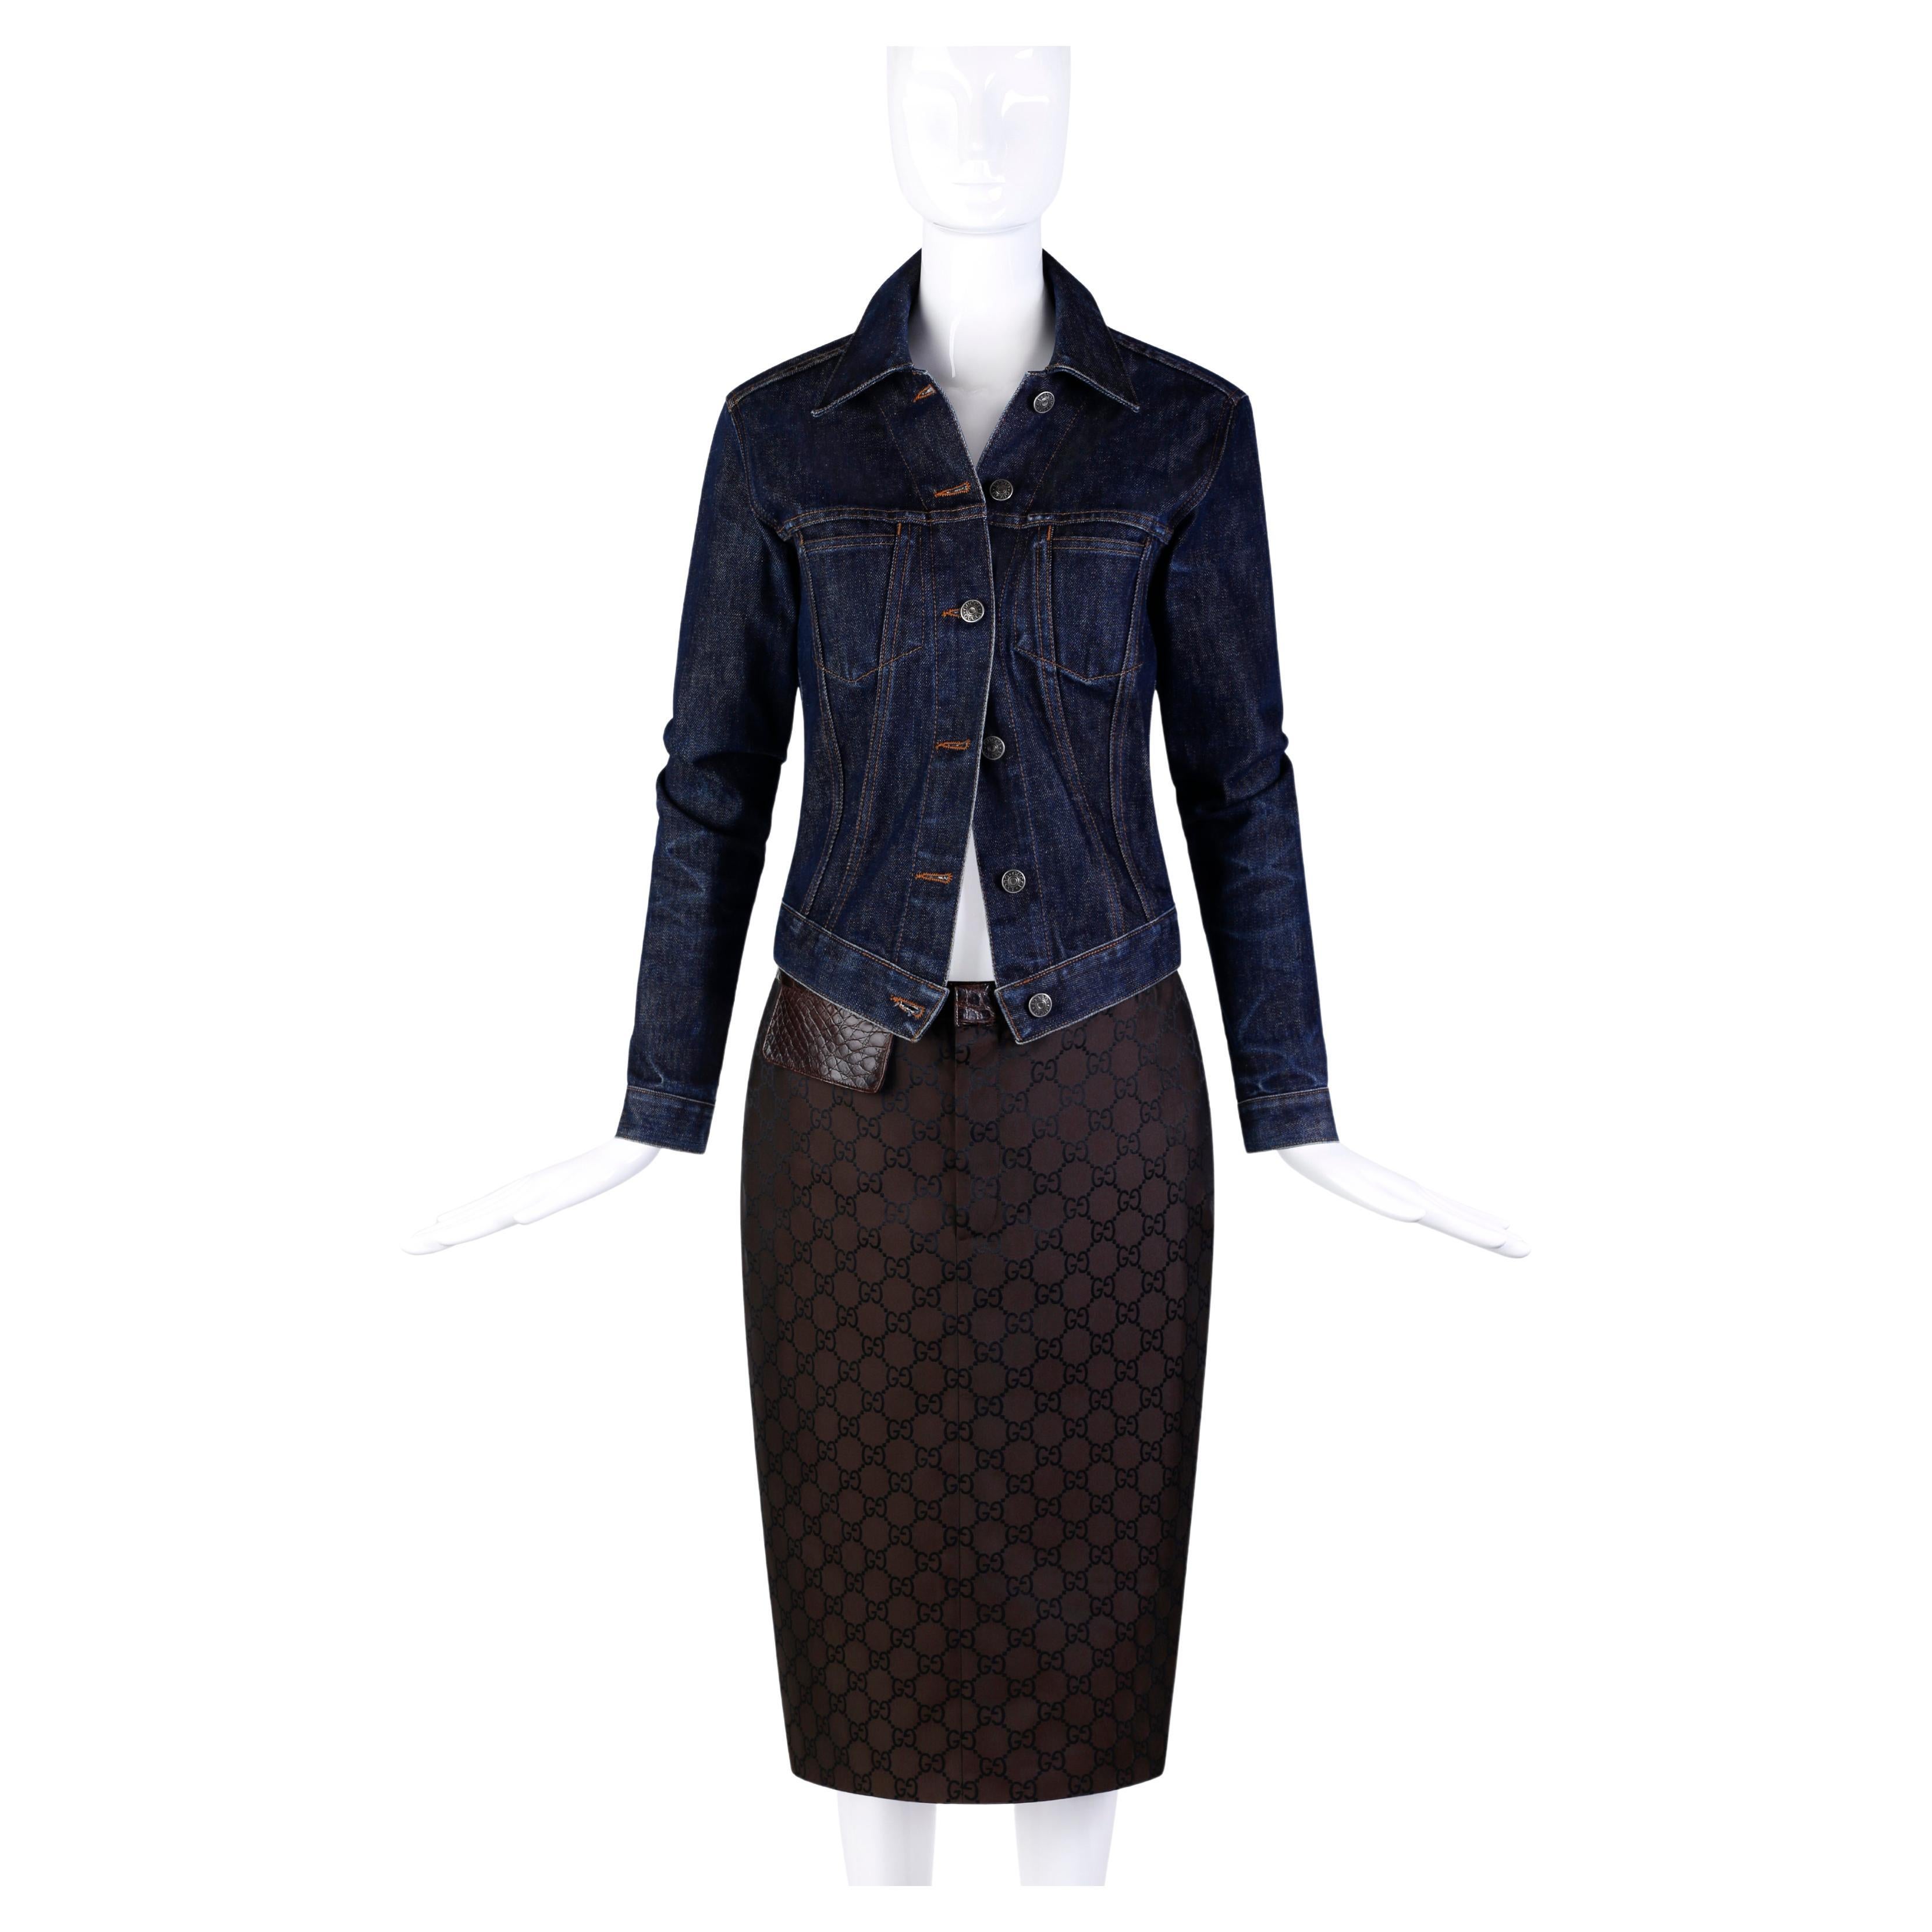 Gucci by Tom Ford S/S 1998 "GG" Print Leather Accented Skirt & Denim Jacket Set